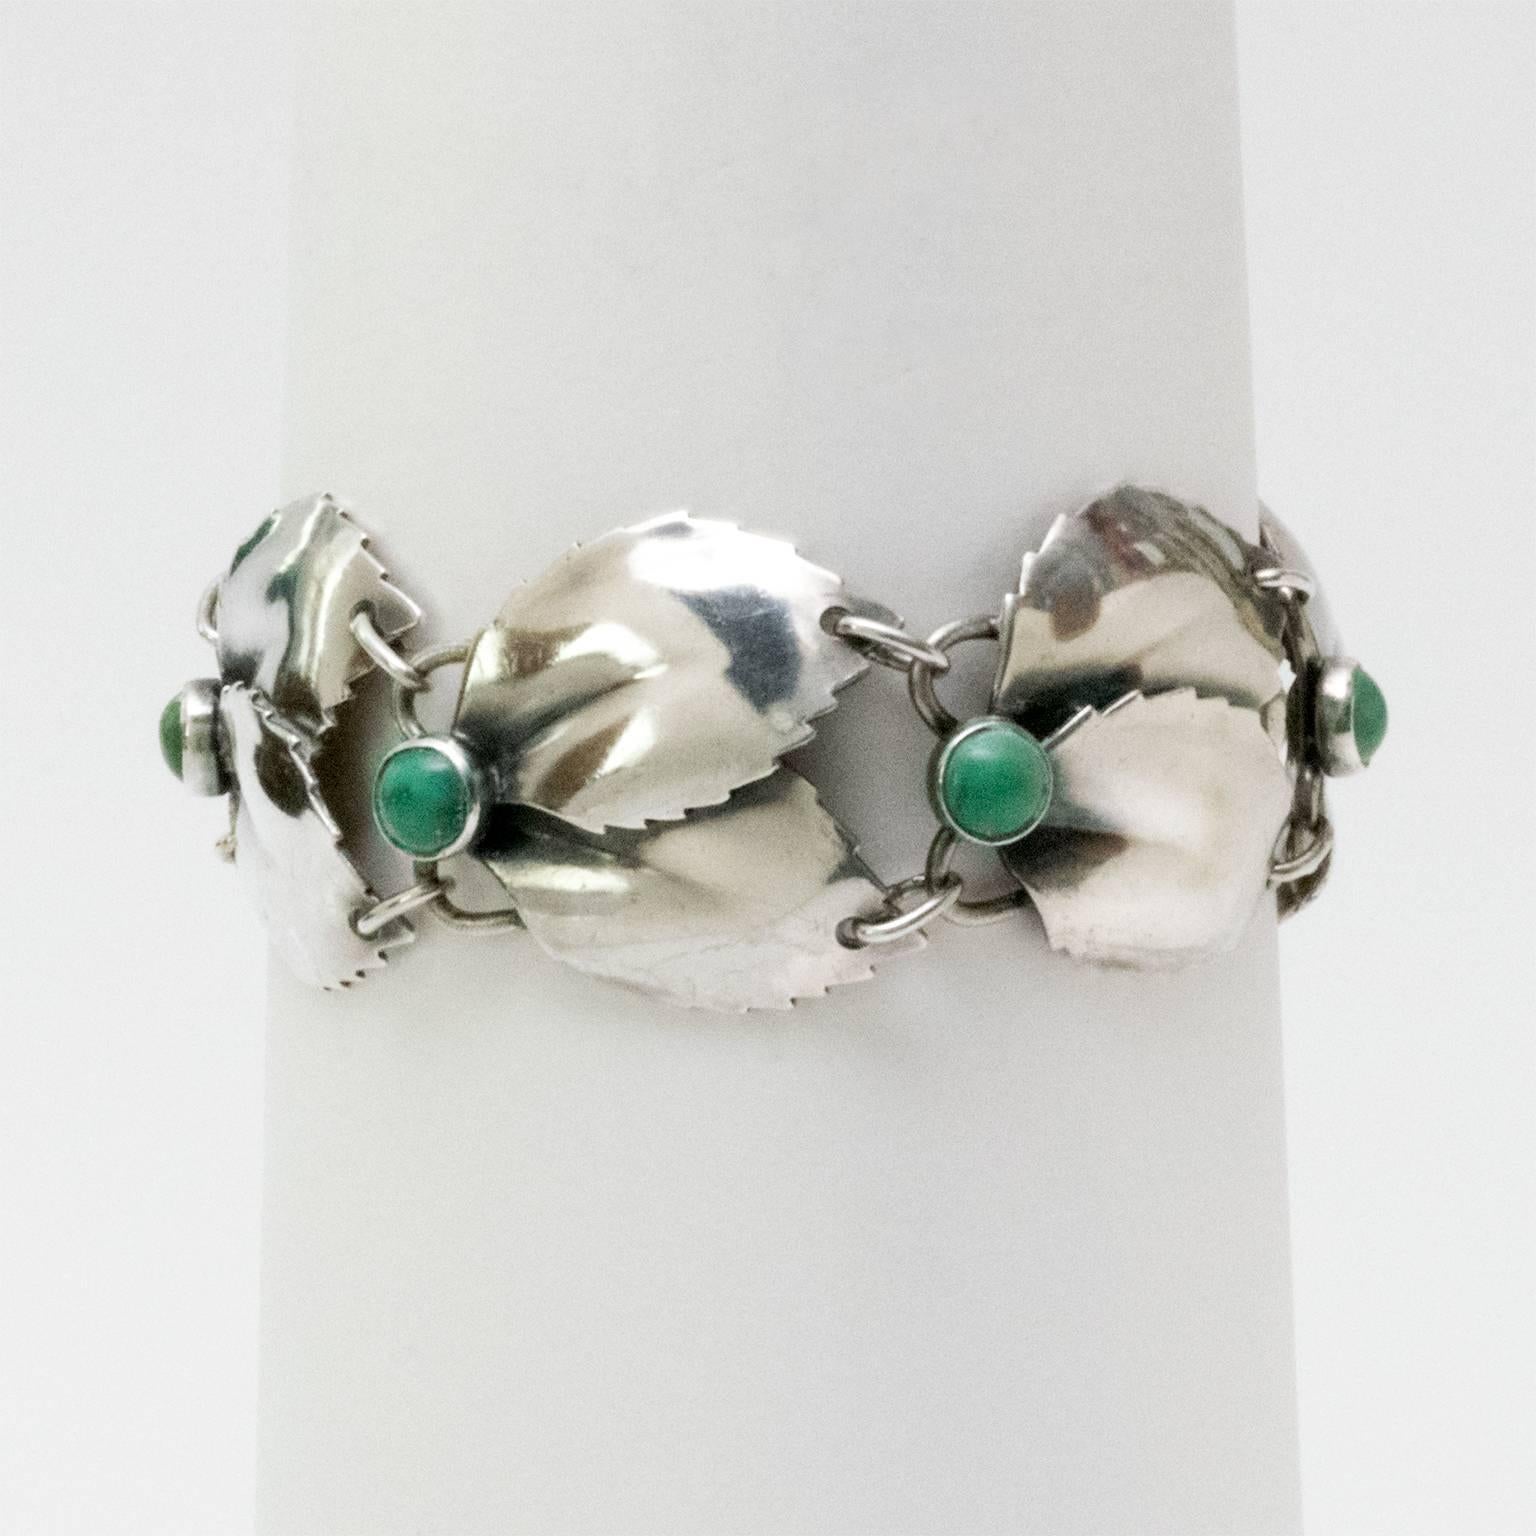 Scandinavian Modern Silver & Malachite Bracelet, Gertrud Engel, A. Michelsen 1950 In Excellent Condition For Sale In New York, NY